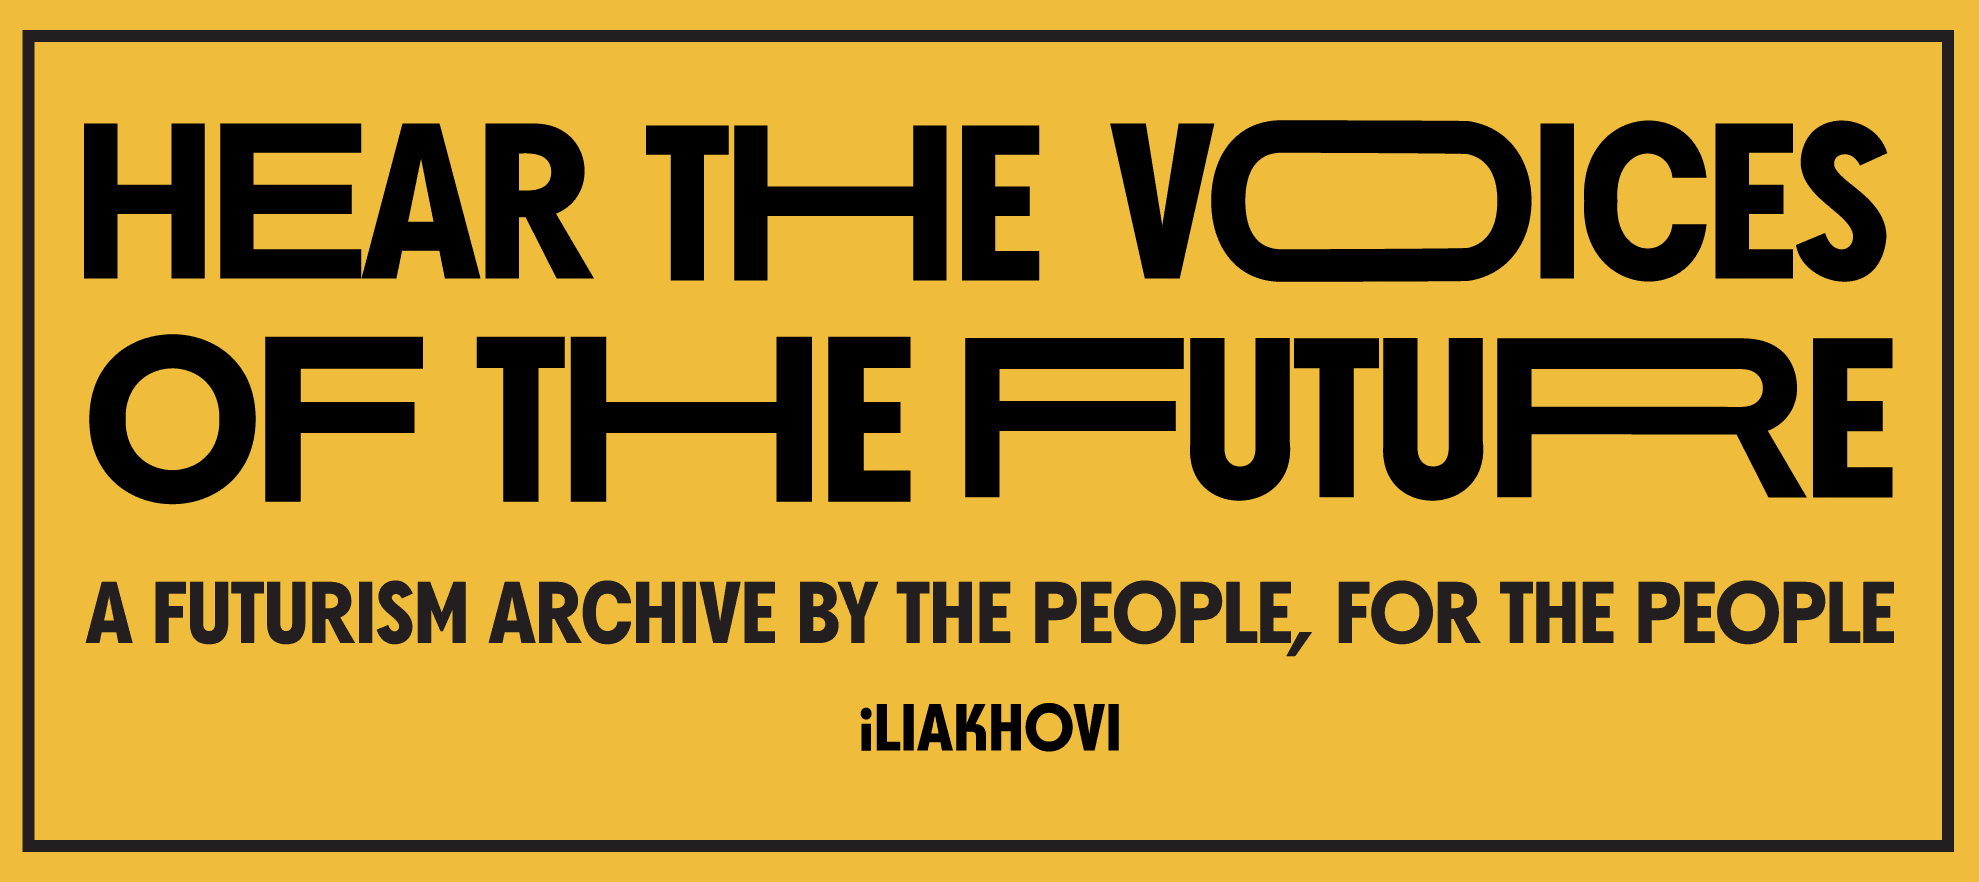 HEAR THE VOICES OF THE FUTURE